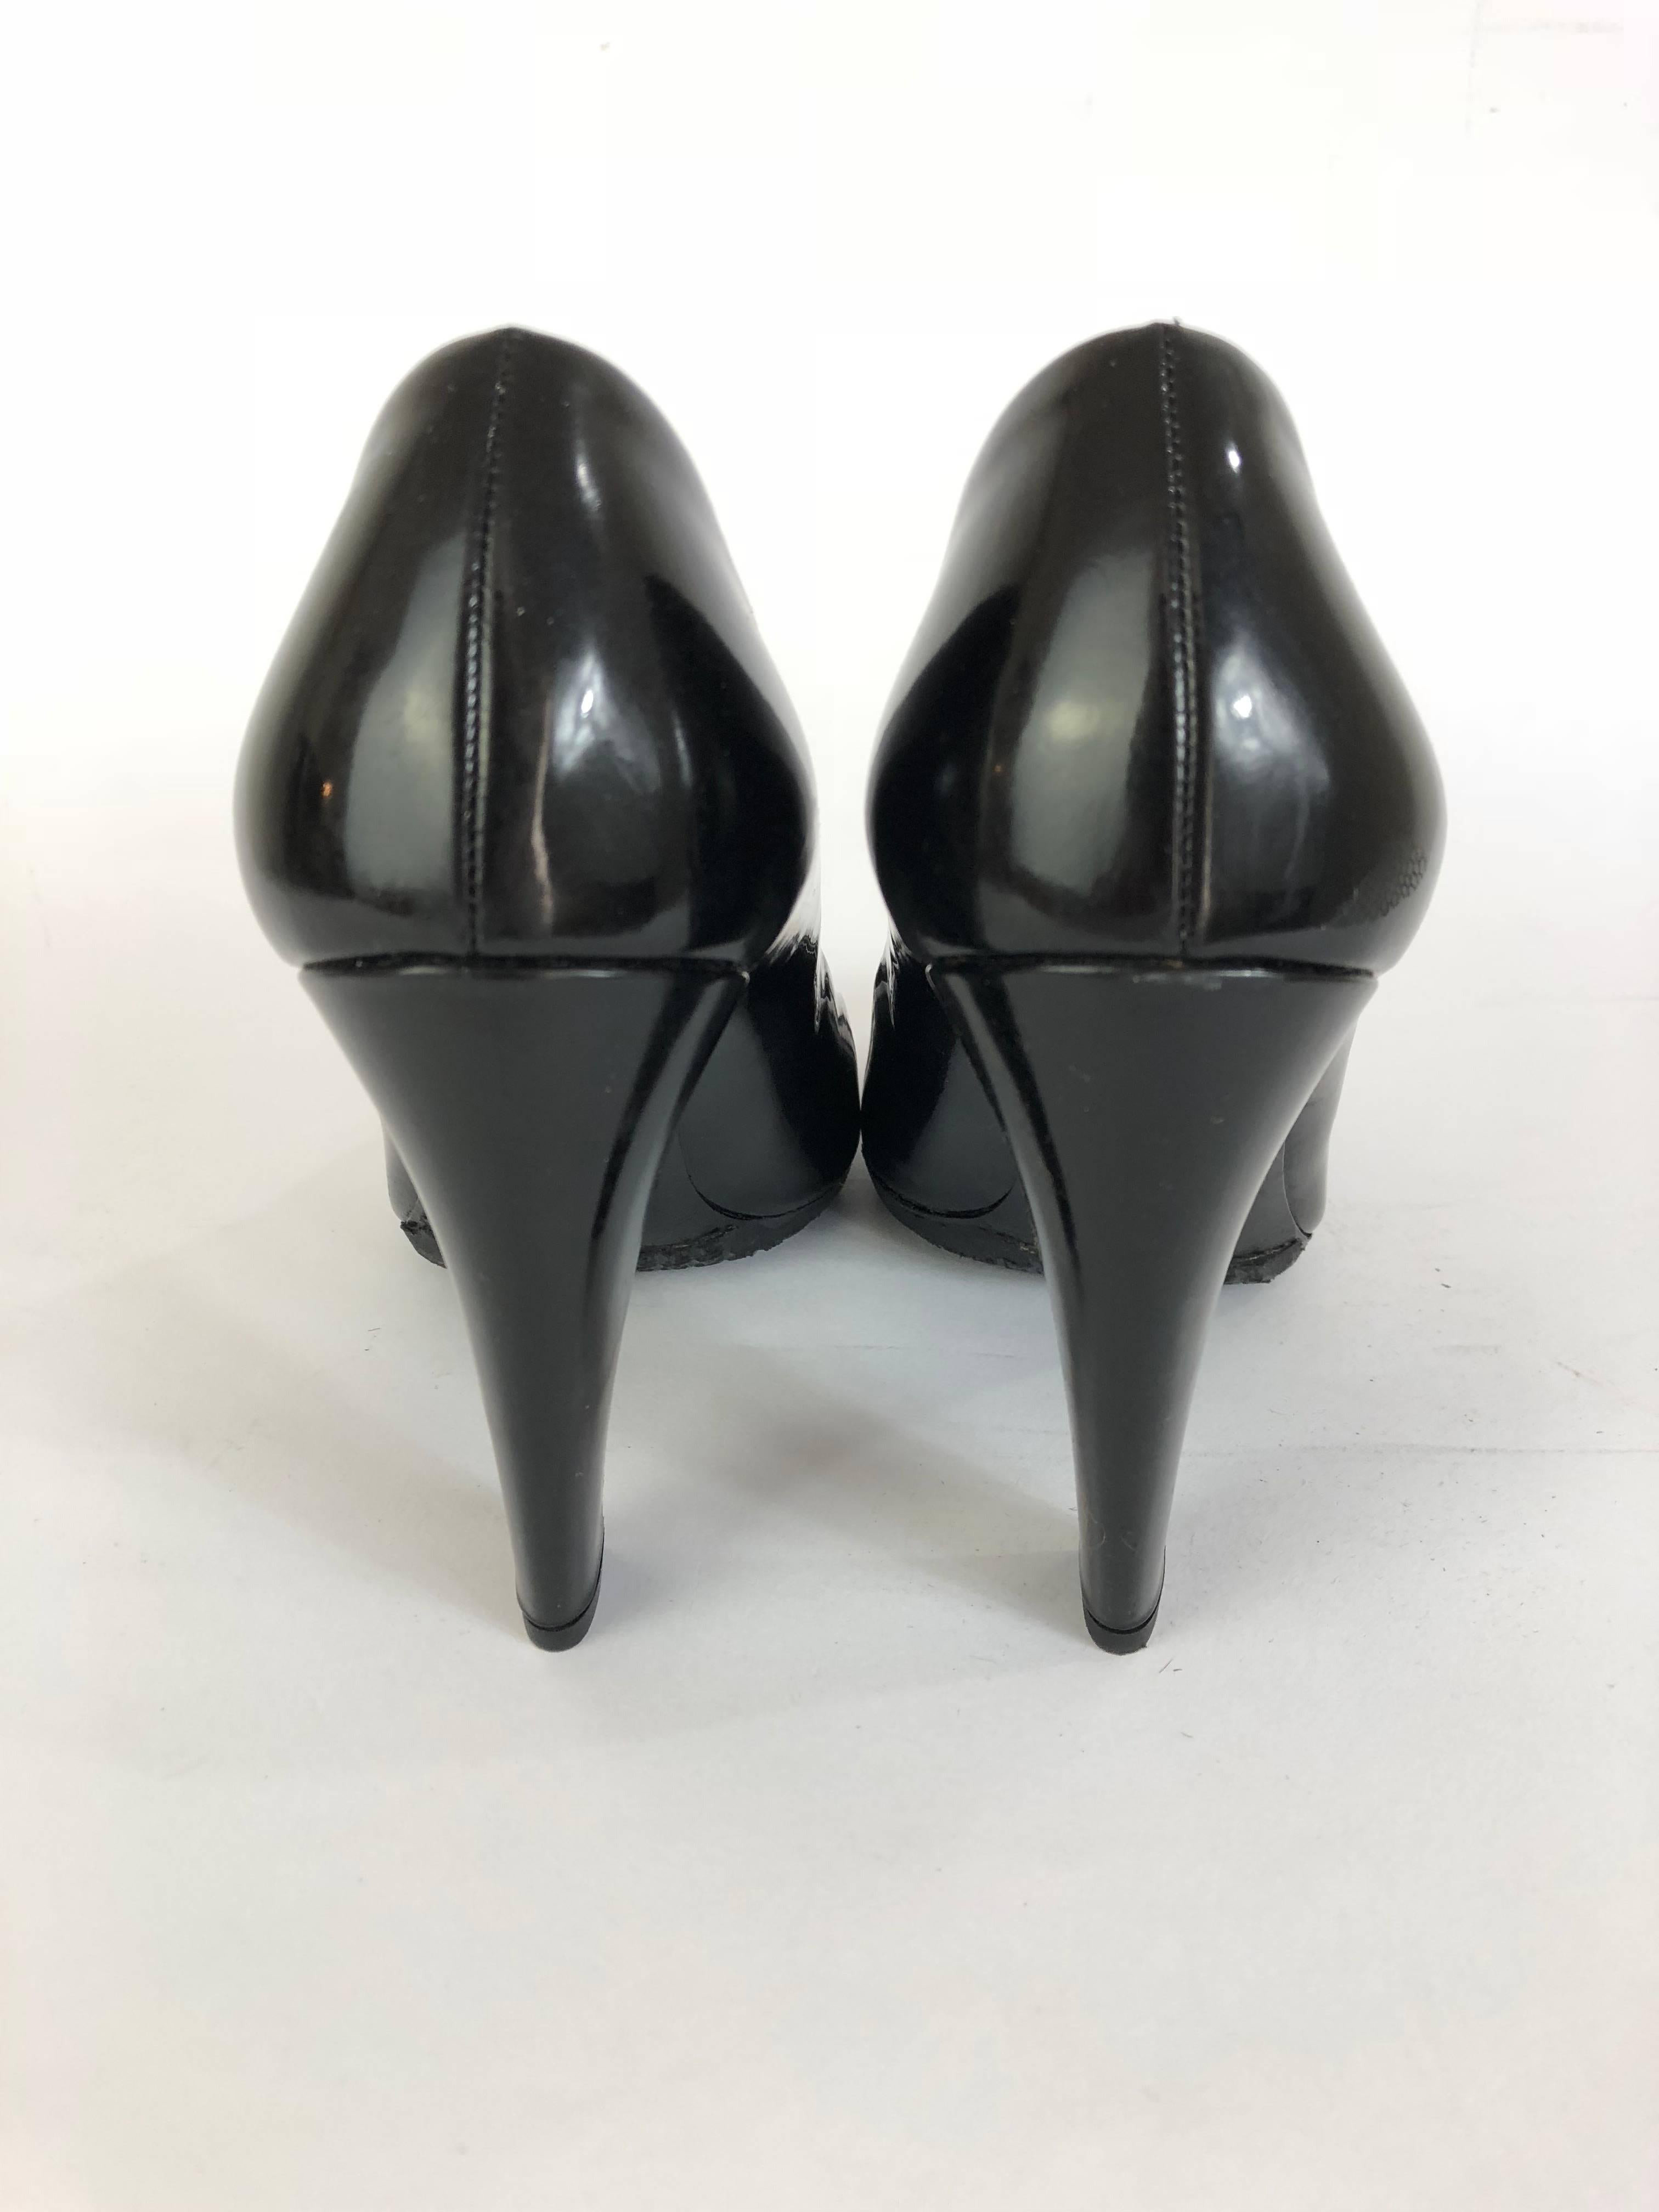 Women's Prada Black Patent Leather Classic Pumps Italian Squared High Heels Shoes, 1990s For Sale